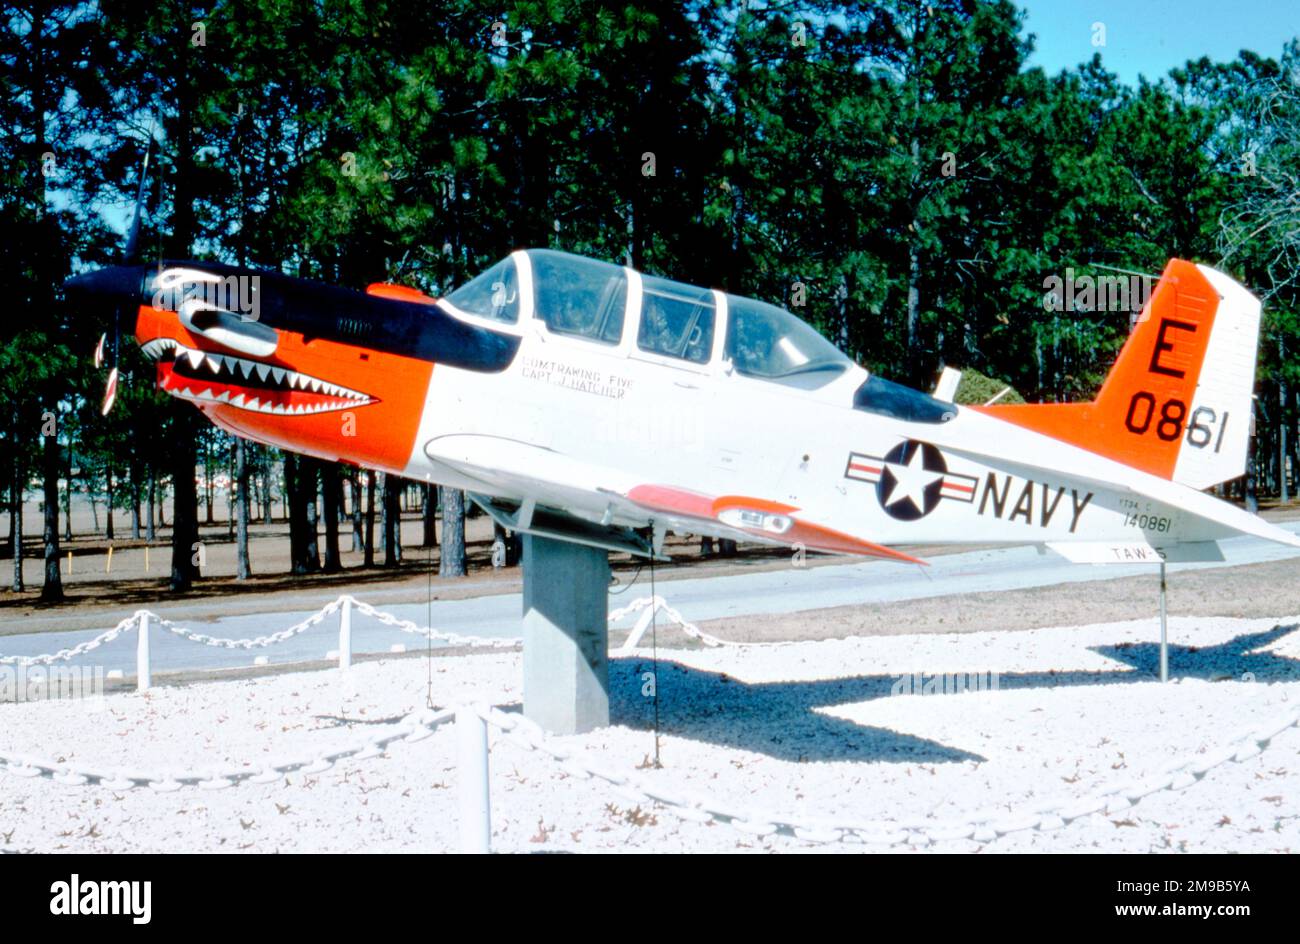 Beechcraft YT-34C Turbo-Mentor 140861 (msn BG-195), one of two T-34B Mentors modified as prototype of the turbo-prop powered Turbo-Mentor. Seen on display preservation park at NAS Whiting Field, FL. Stock Photo